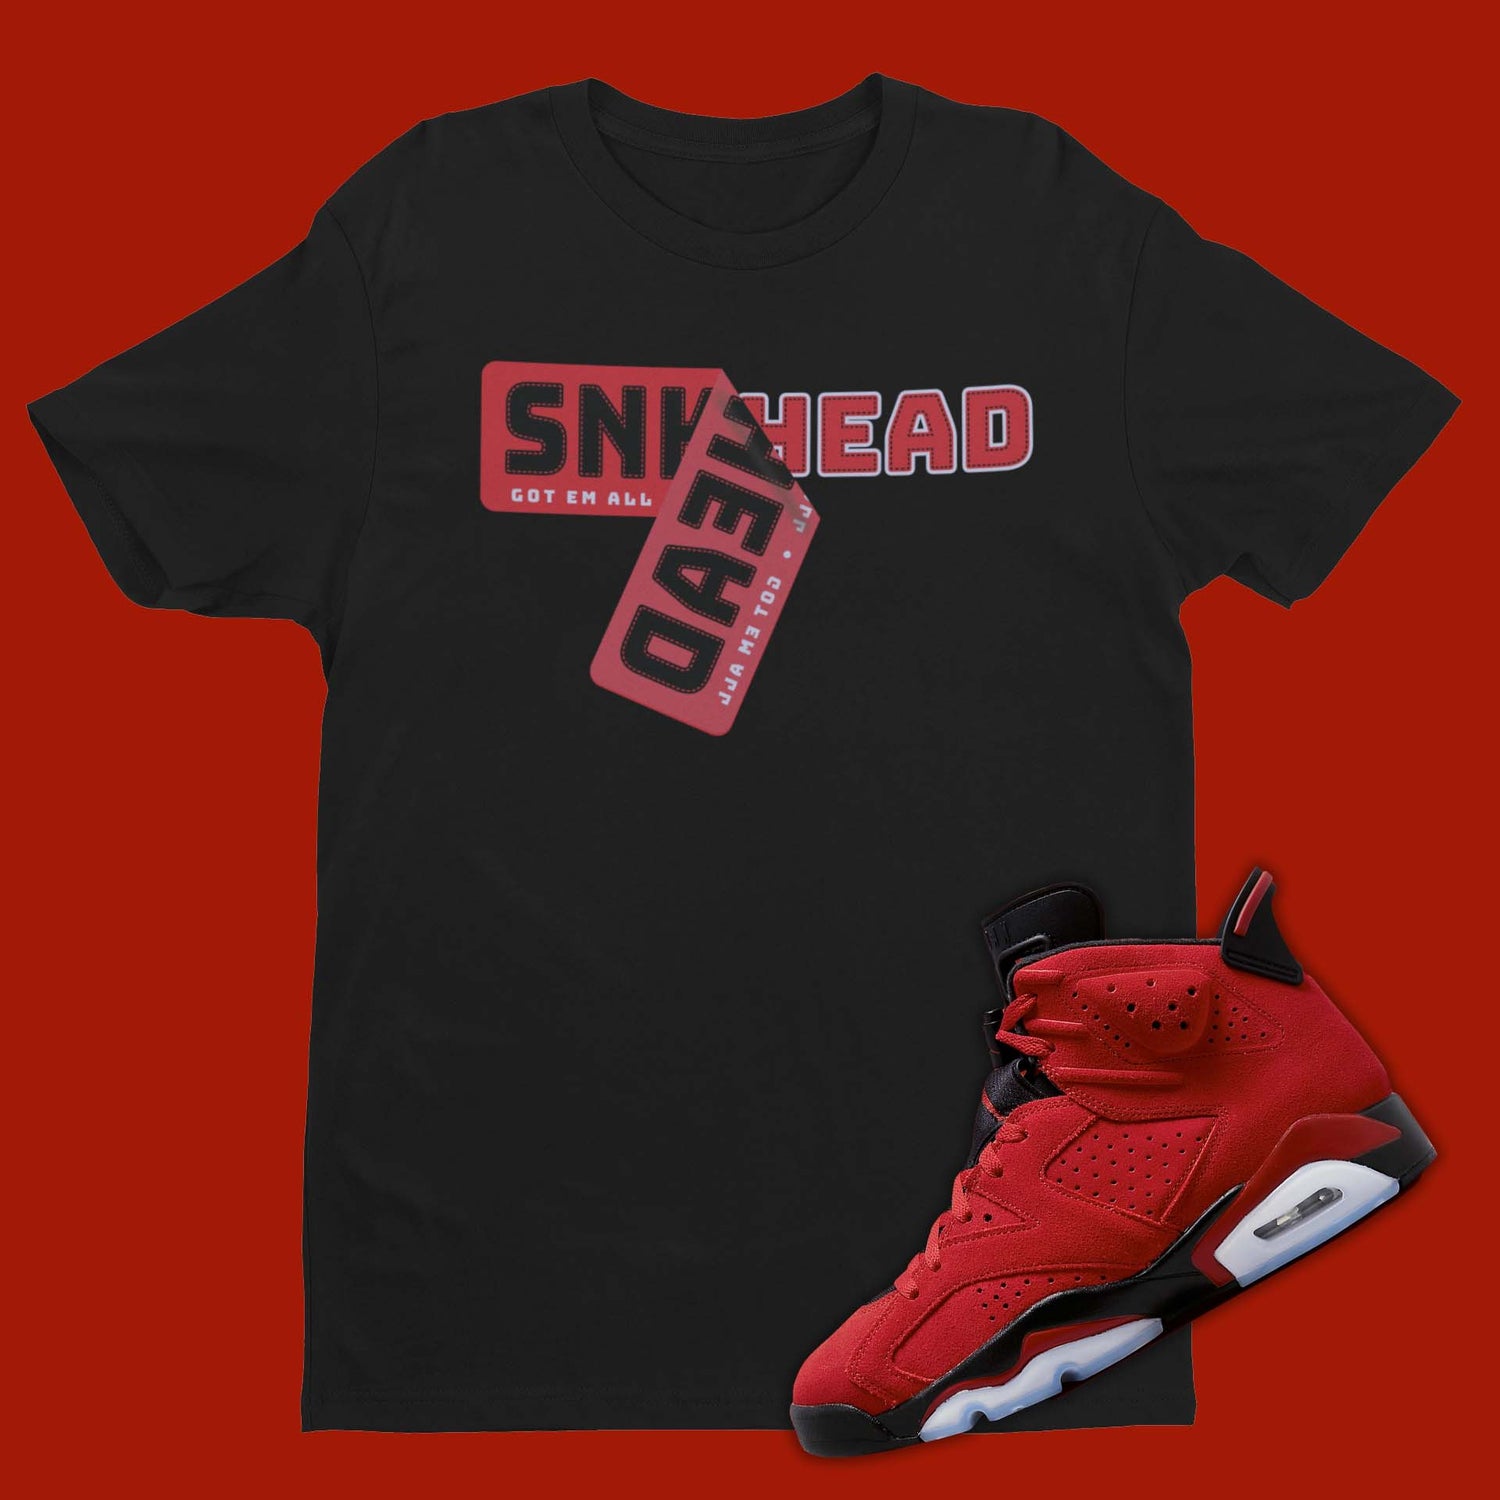 The perfect Air Jordan 6 Toro Bravo shirt to match your sneakers! Our Match Jordan 6 t-shirt is made to compliment your kicks. Bring your sneakers to the next level with this Toro Bravo 6s shirt. Match and feel trendy with this graphic tee!